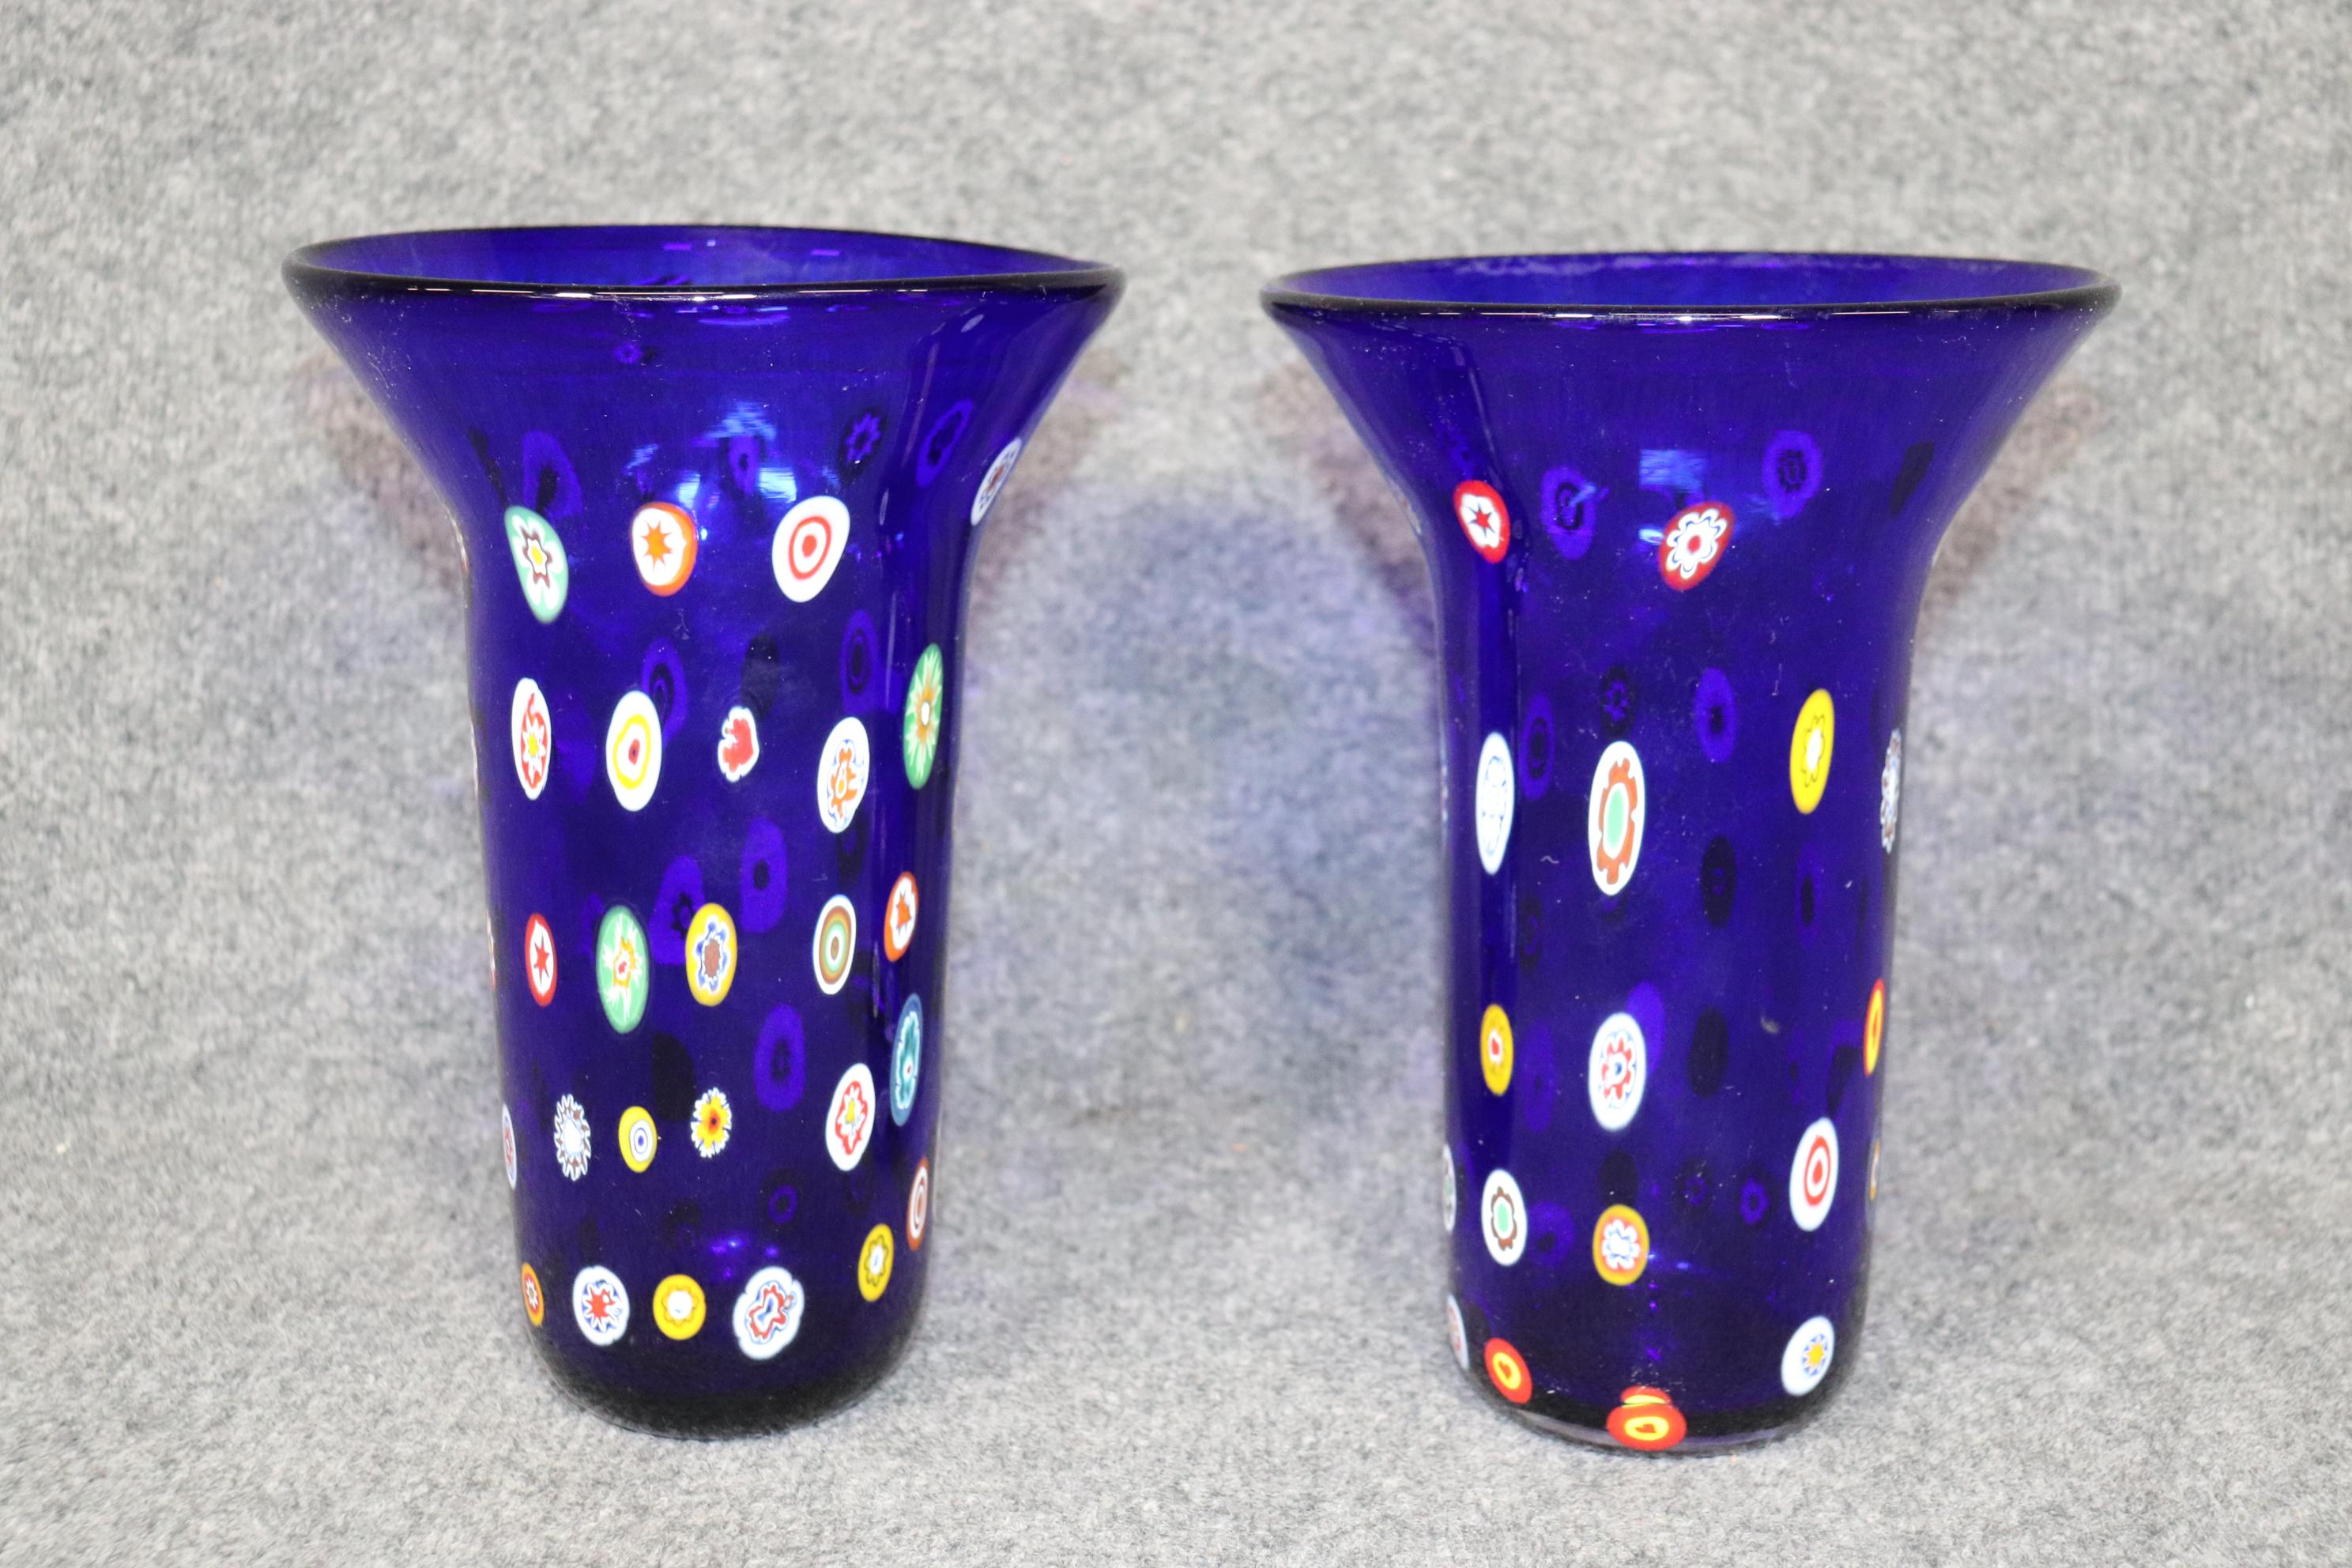 Dimensions: H: 10 1/2in W: 7 1/2in D: 7 1/2in 
This Mid-Century Modern Pair of Art Glass Murano Vases are truly exceptional and made of the highest quality! These vases are in immaculate condition for their age with only a few light surface